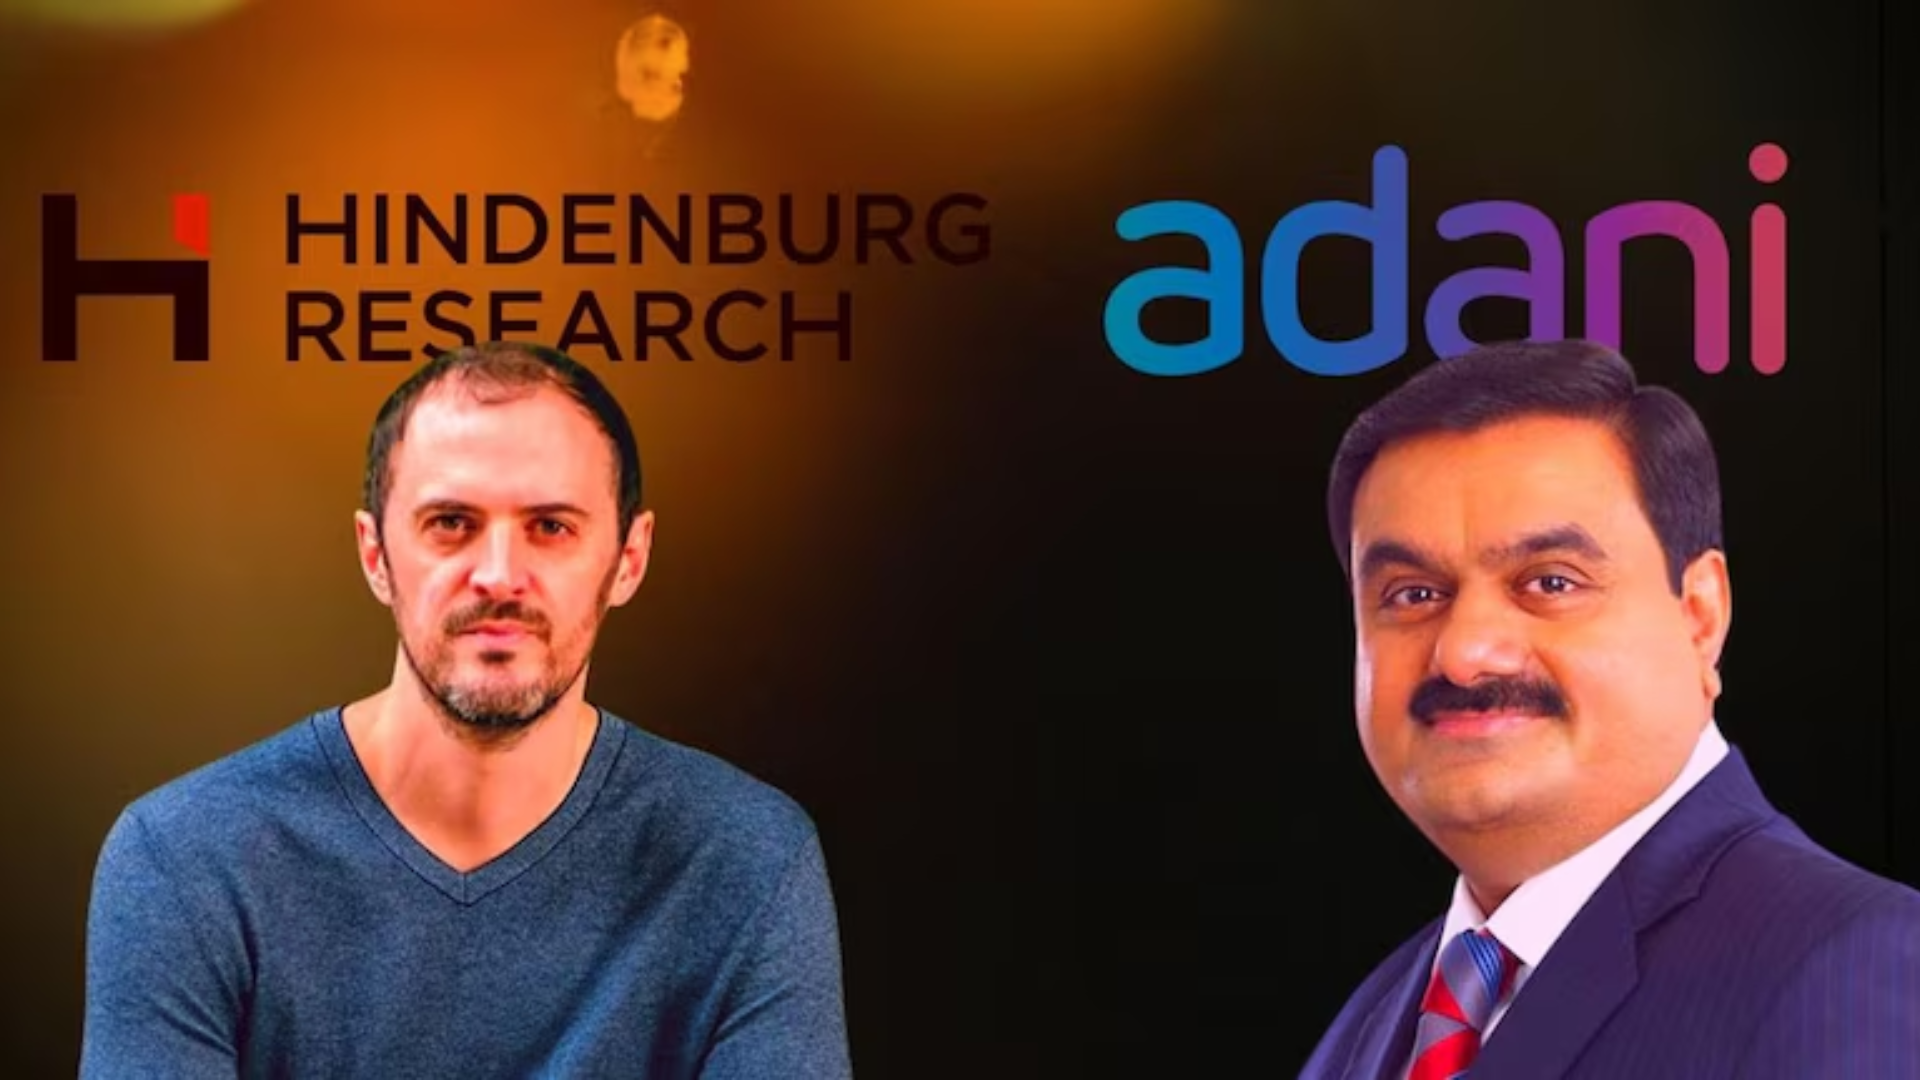 Hindenburg Reseach Receives 46-Page Show-Cause Notice From SEBI In Adani Case; Calls It “Attempt To Silence Those Who Expose Corrupton”